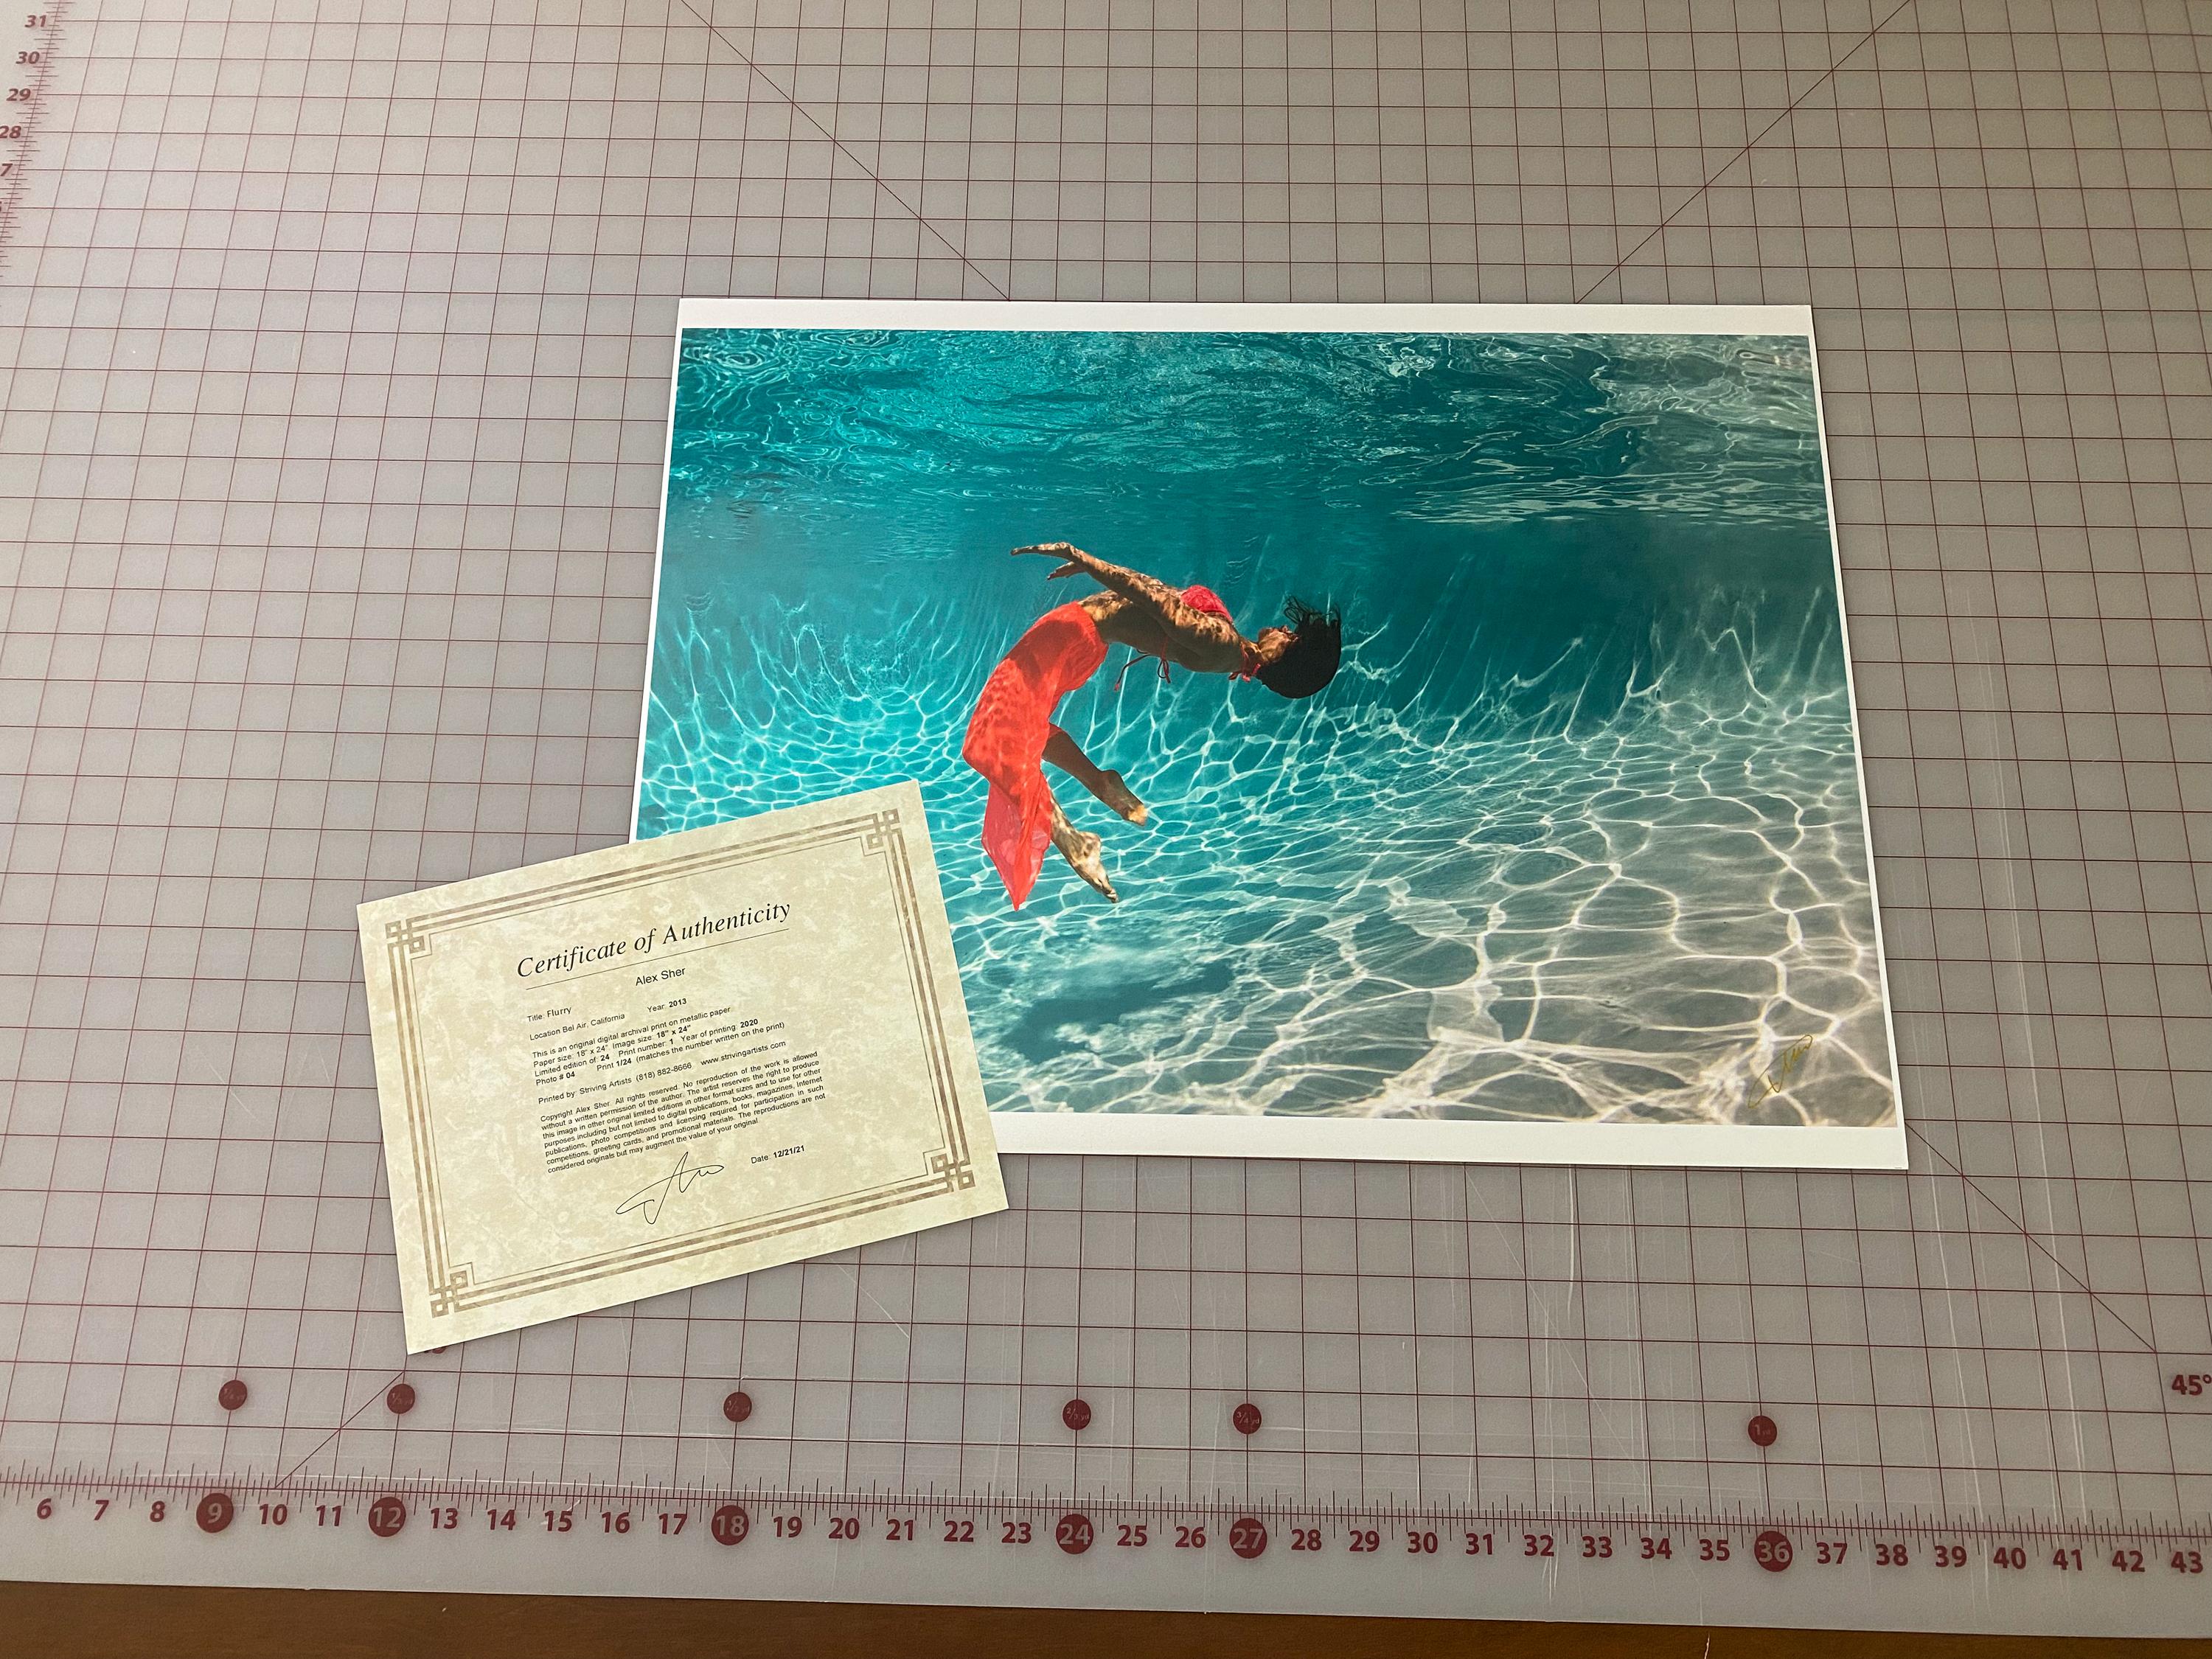 Underwater photograph of a young woman in red dress dancing underwater in a pool. A very bright photograph with plenty of sun and positivity.

Model: a Russian dancer Olga Sokolova.  Check out her performance 